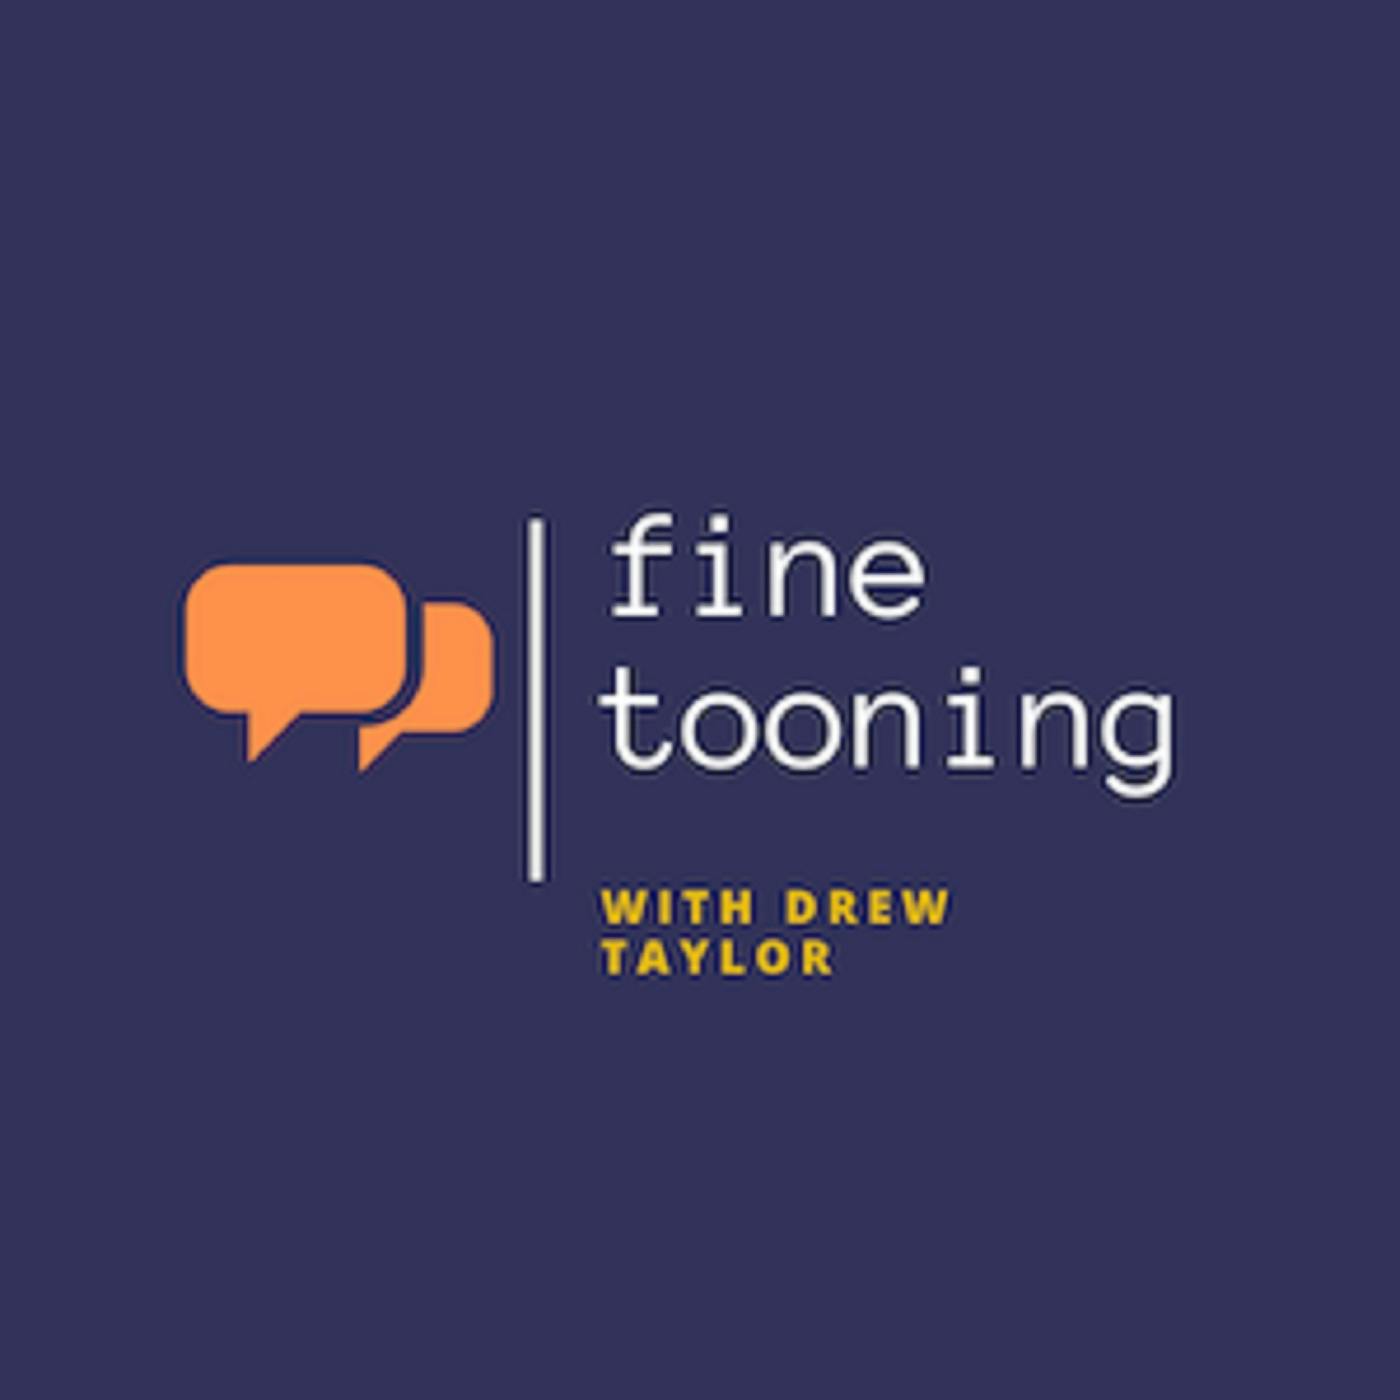 Fine Tooning with Drew Taylor Ep 436: “Shrek 2” celebrates its 20th anniversary